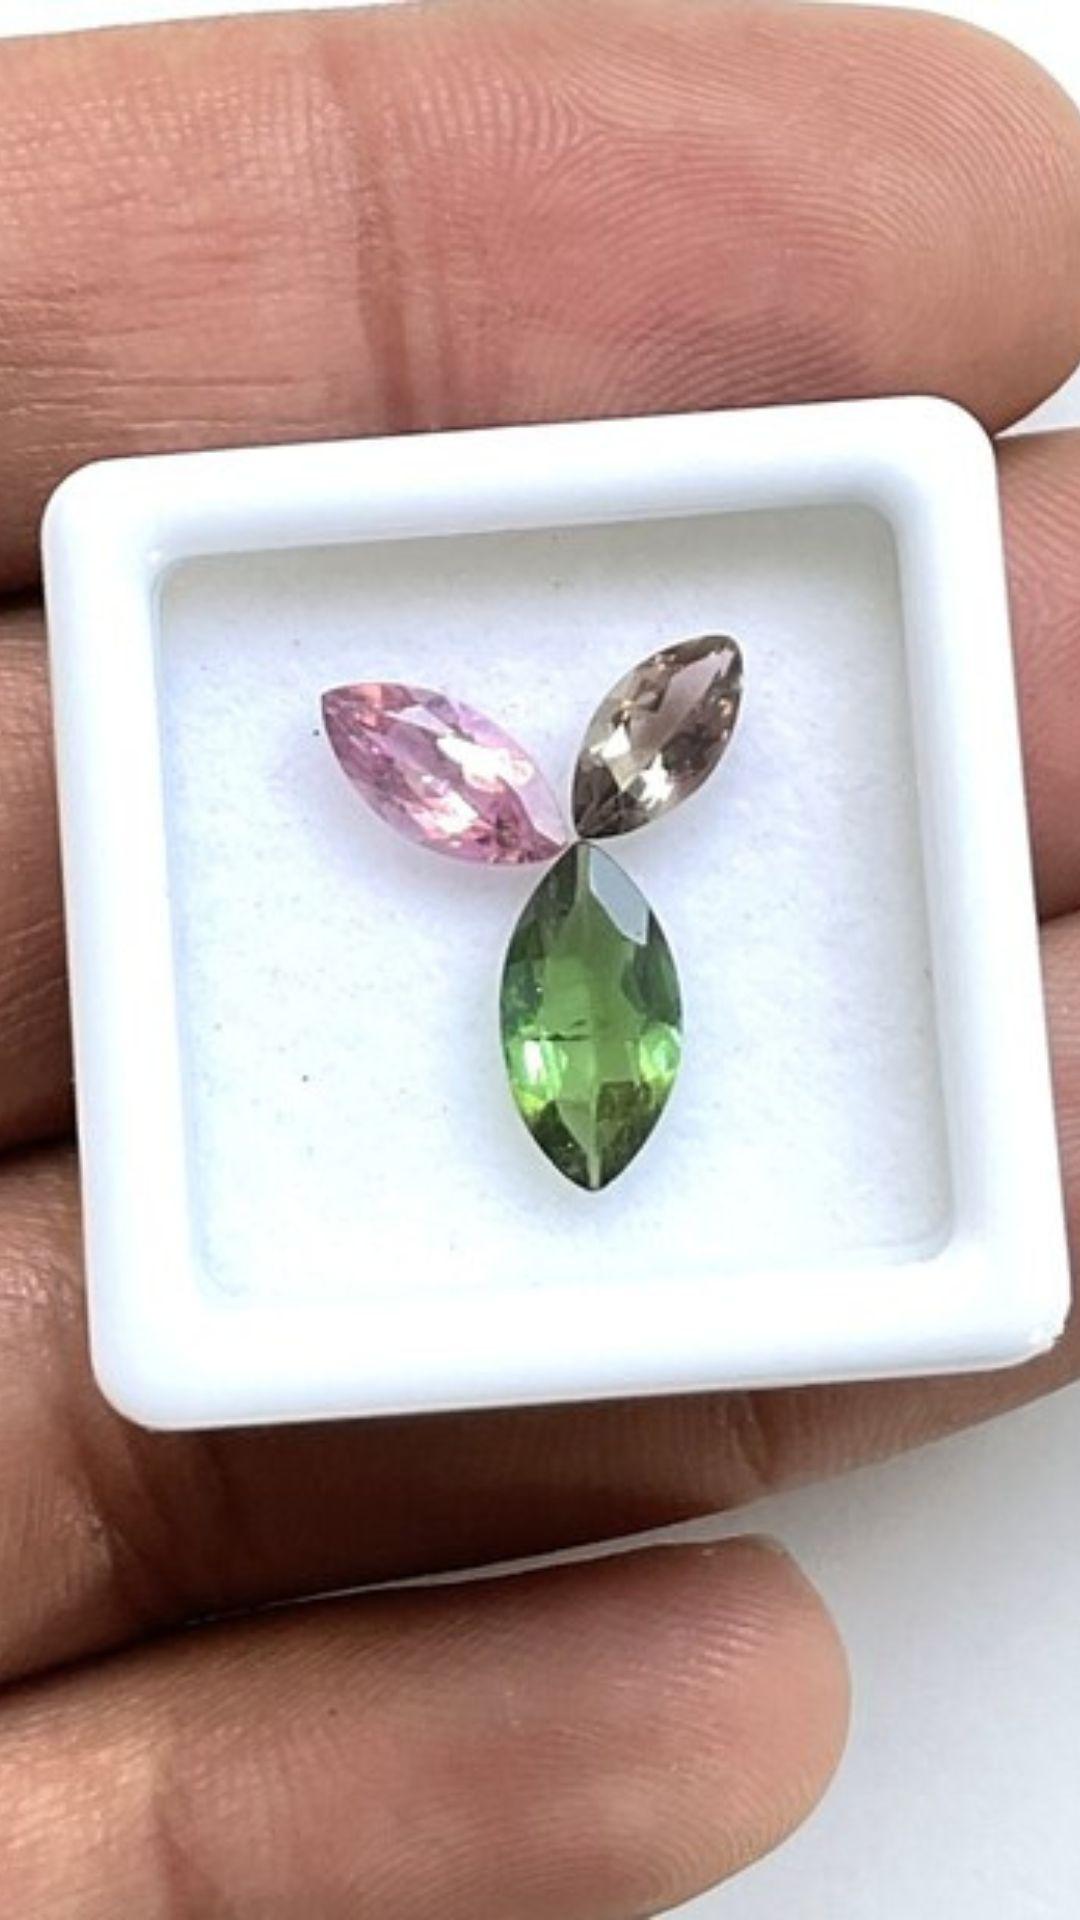 Gemstone - Tourmaline
Weight- 2.35 Carats
Shape - Marquise
Size - 8x4 to 11x5.5 MM
Pieces - 3